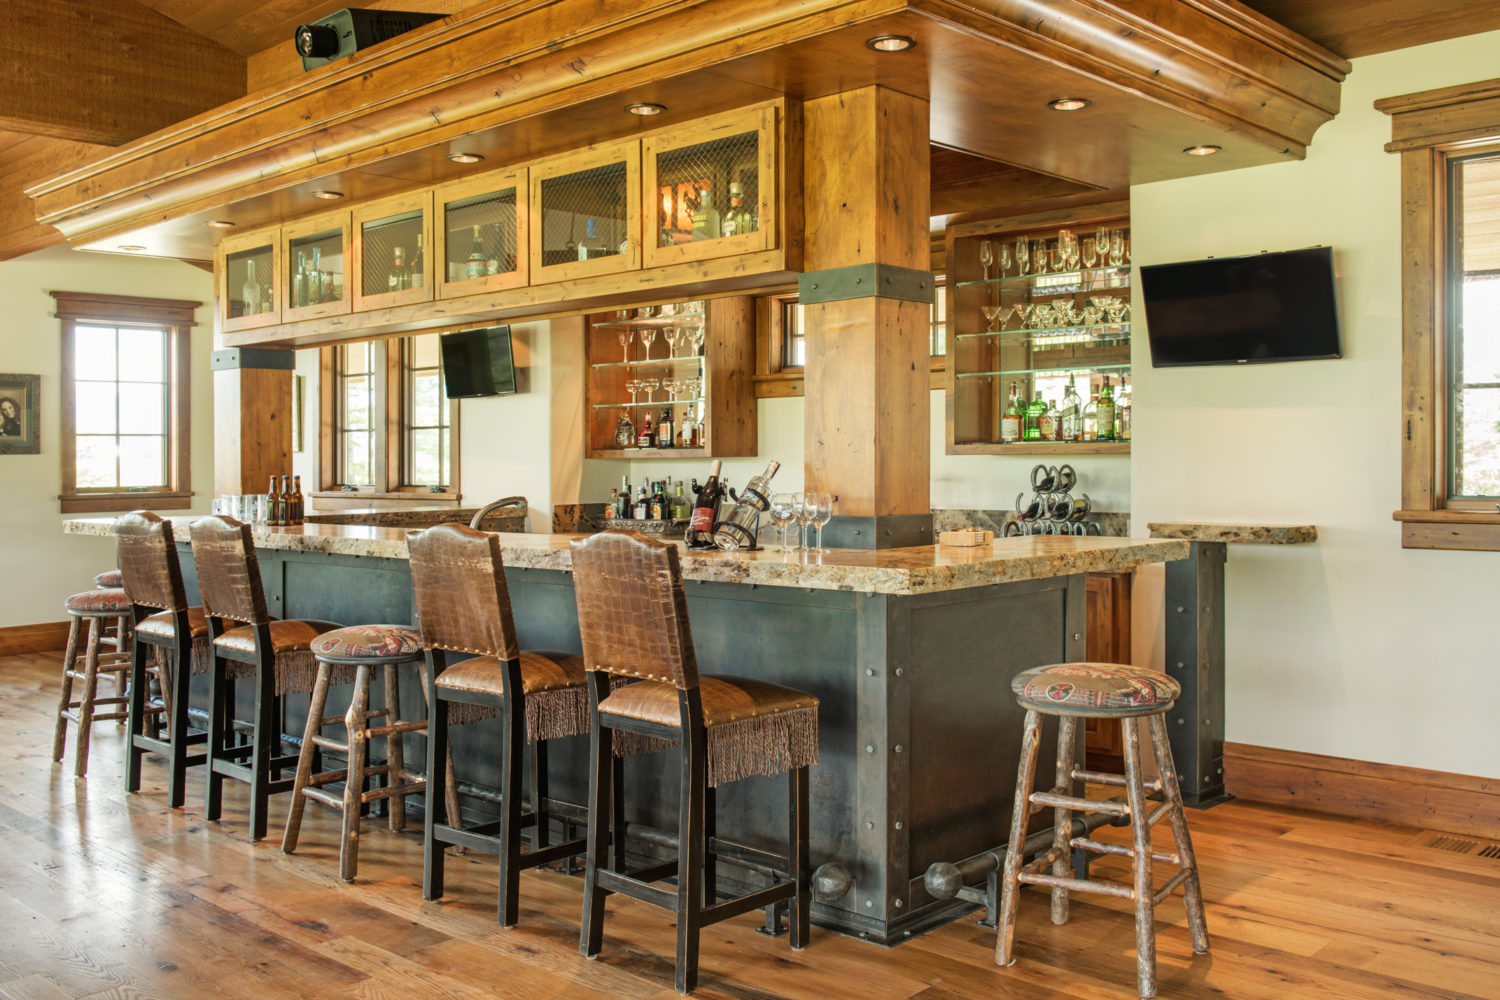 A large bar with glasses and barstools